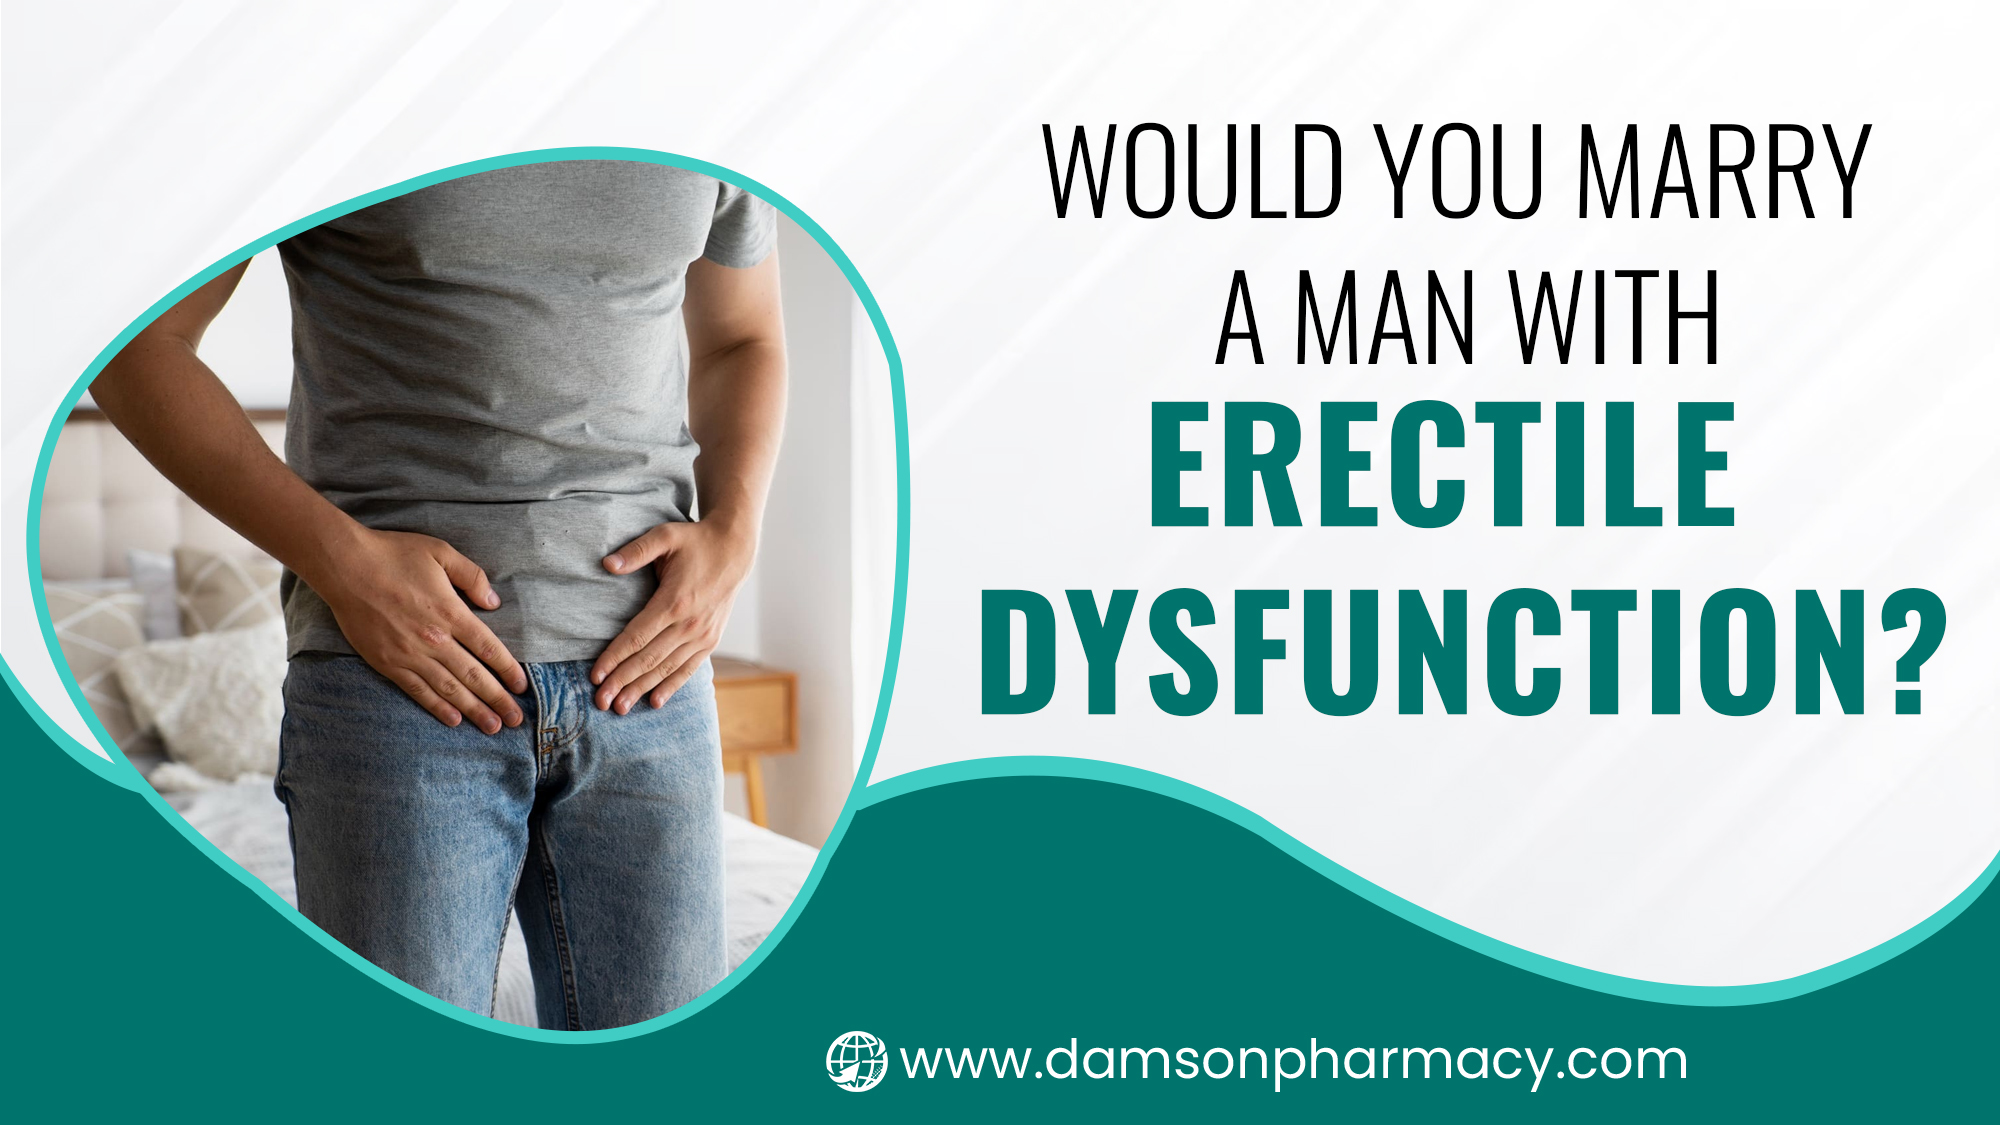 Would You Marry A Man With Erectile Dysfunction? - Damson Pharmacy